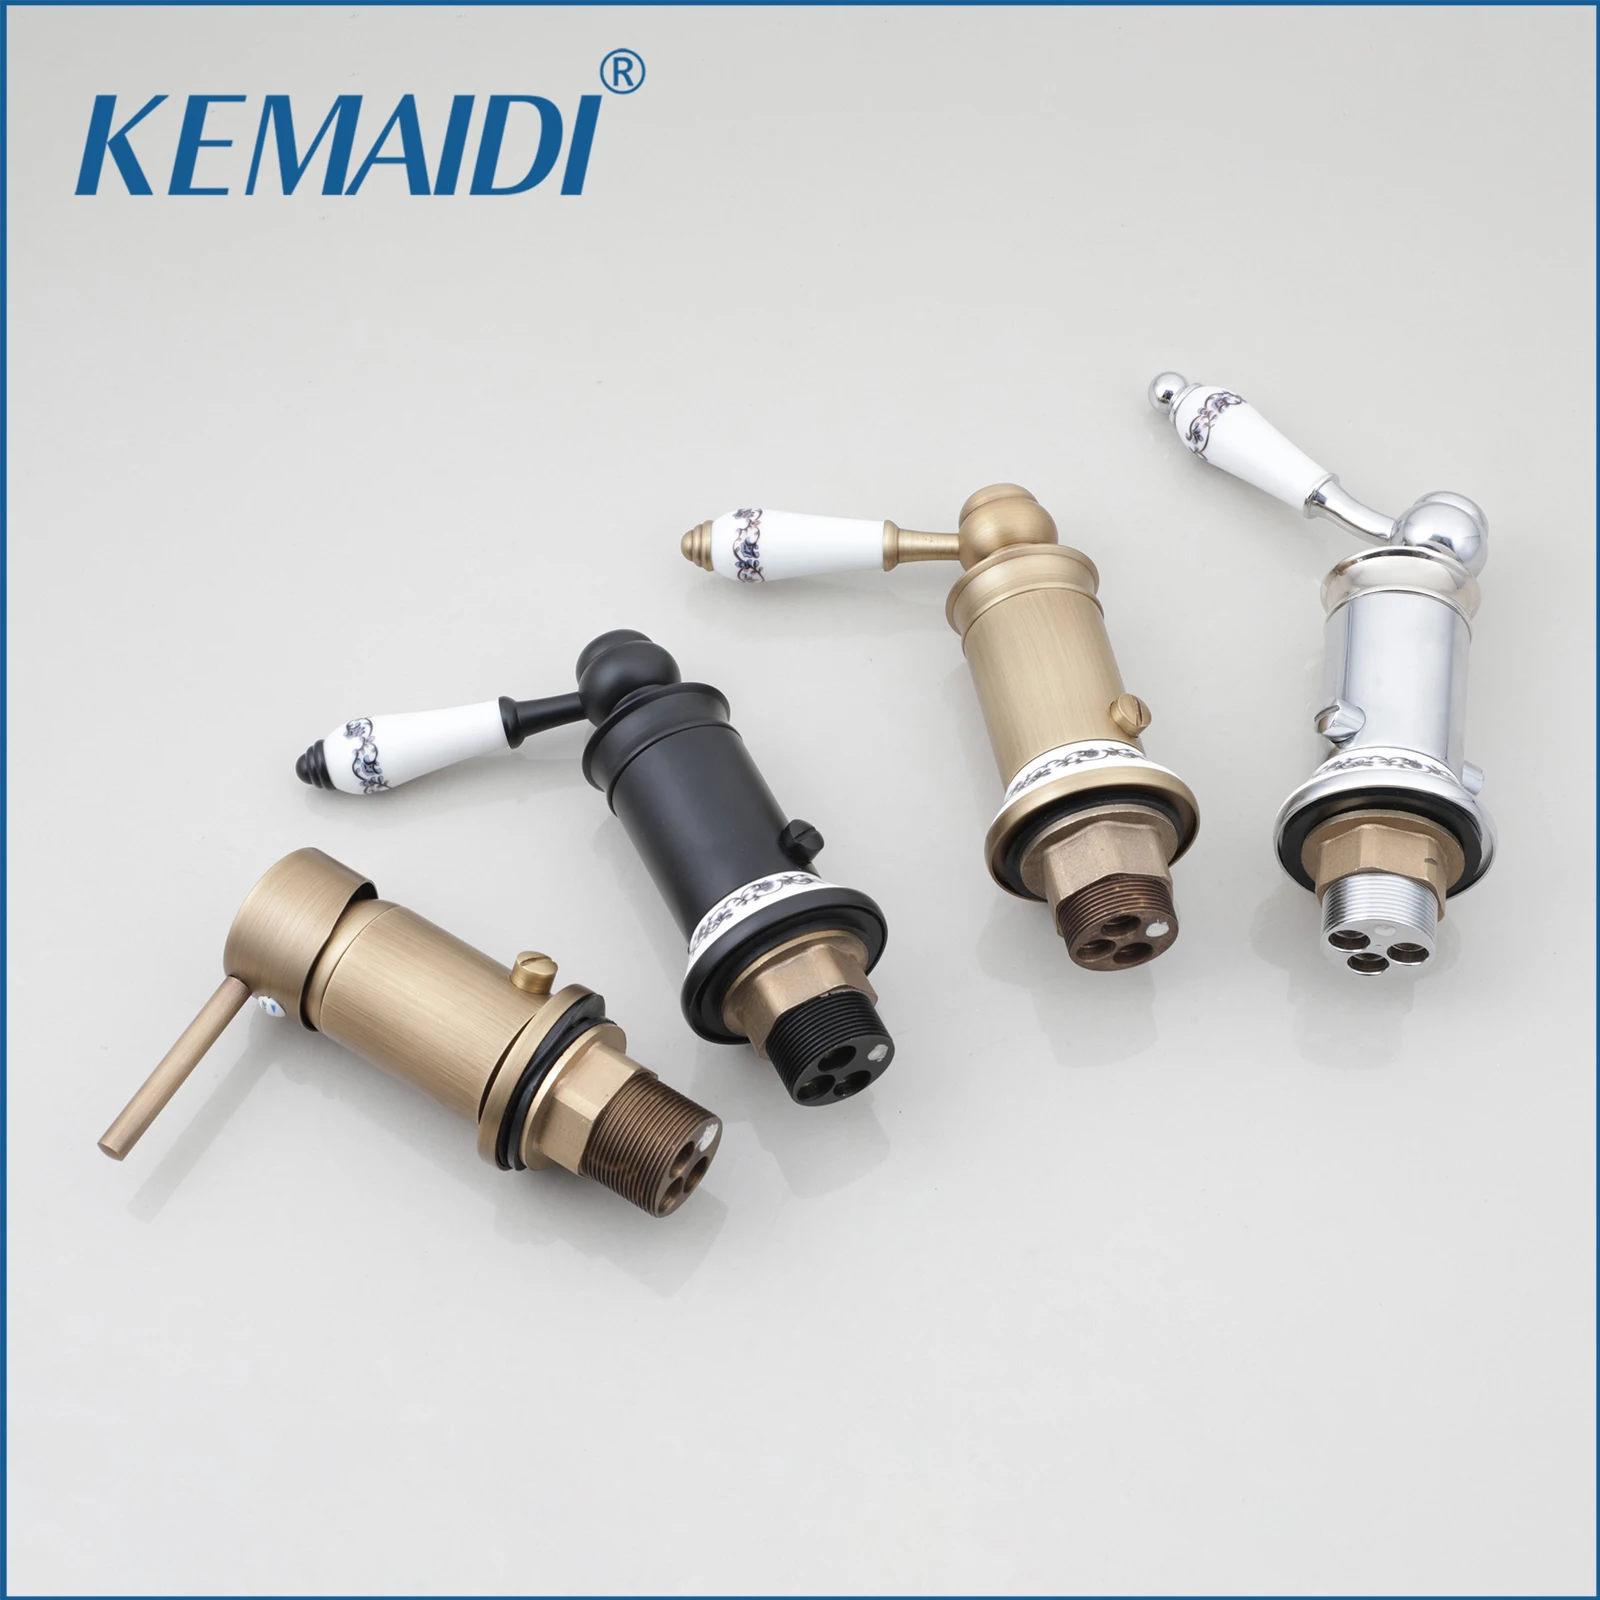 

KEMAIDI Antique Brass Bidet Faucet Hot Cold Water Control Valve Bathtub Faucet Switch Mixing Valve Tap For Toilet Deck Mounted